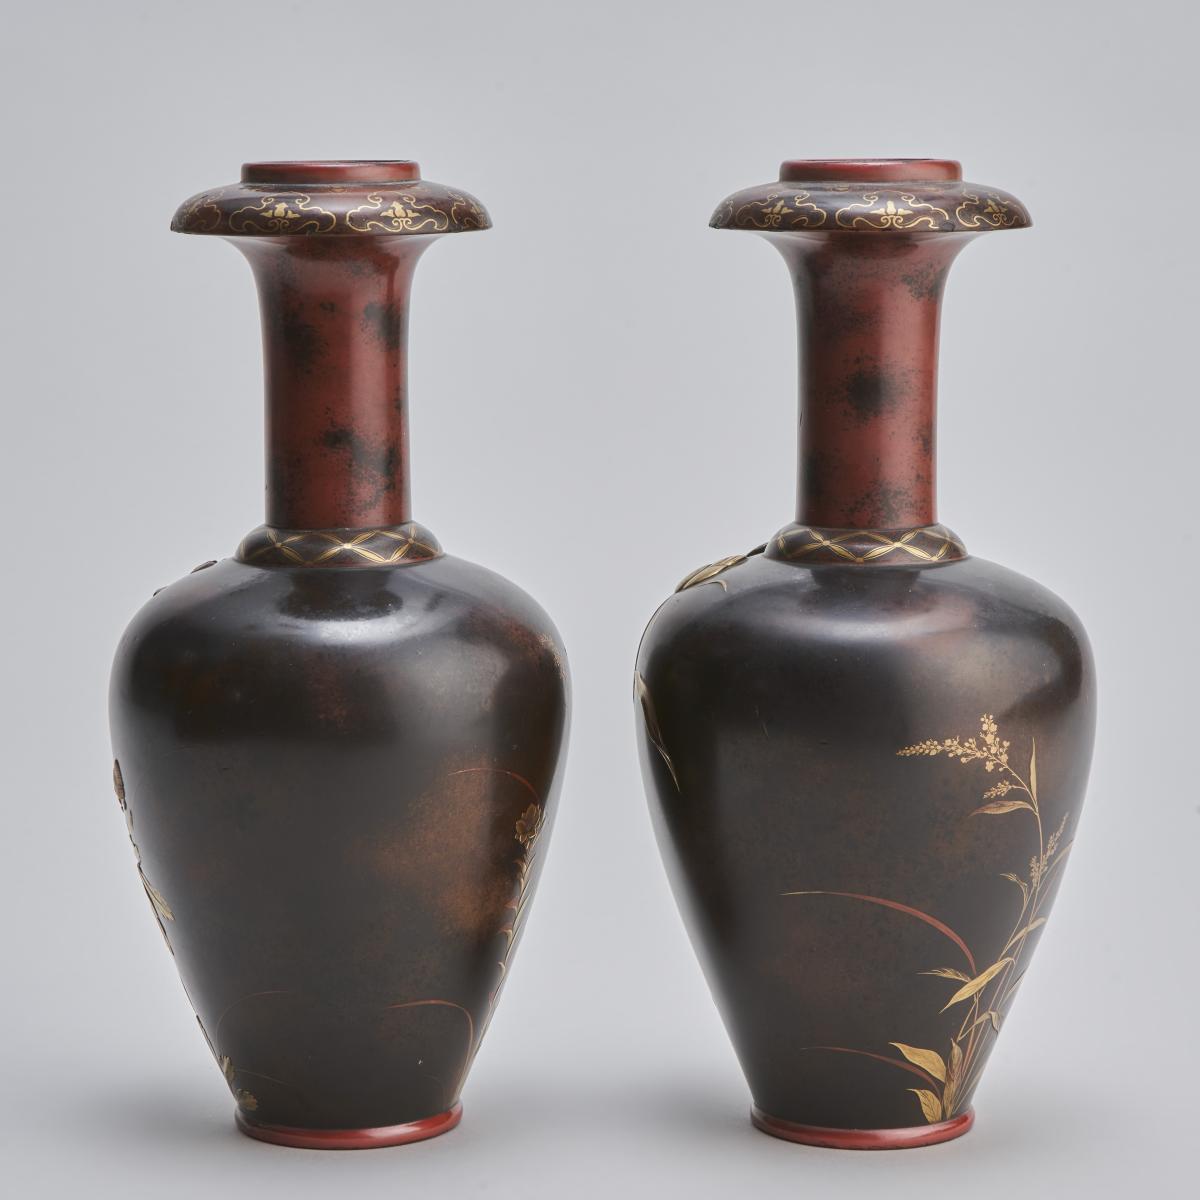 A charming pair of Bronze vases depicting sparrows and foliage (Japanese Meiji-era)